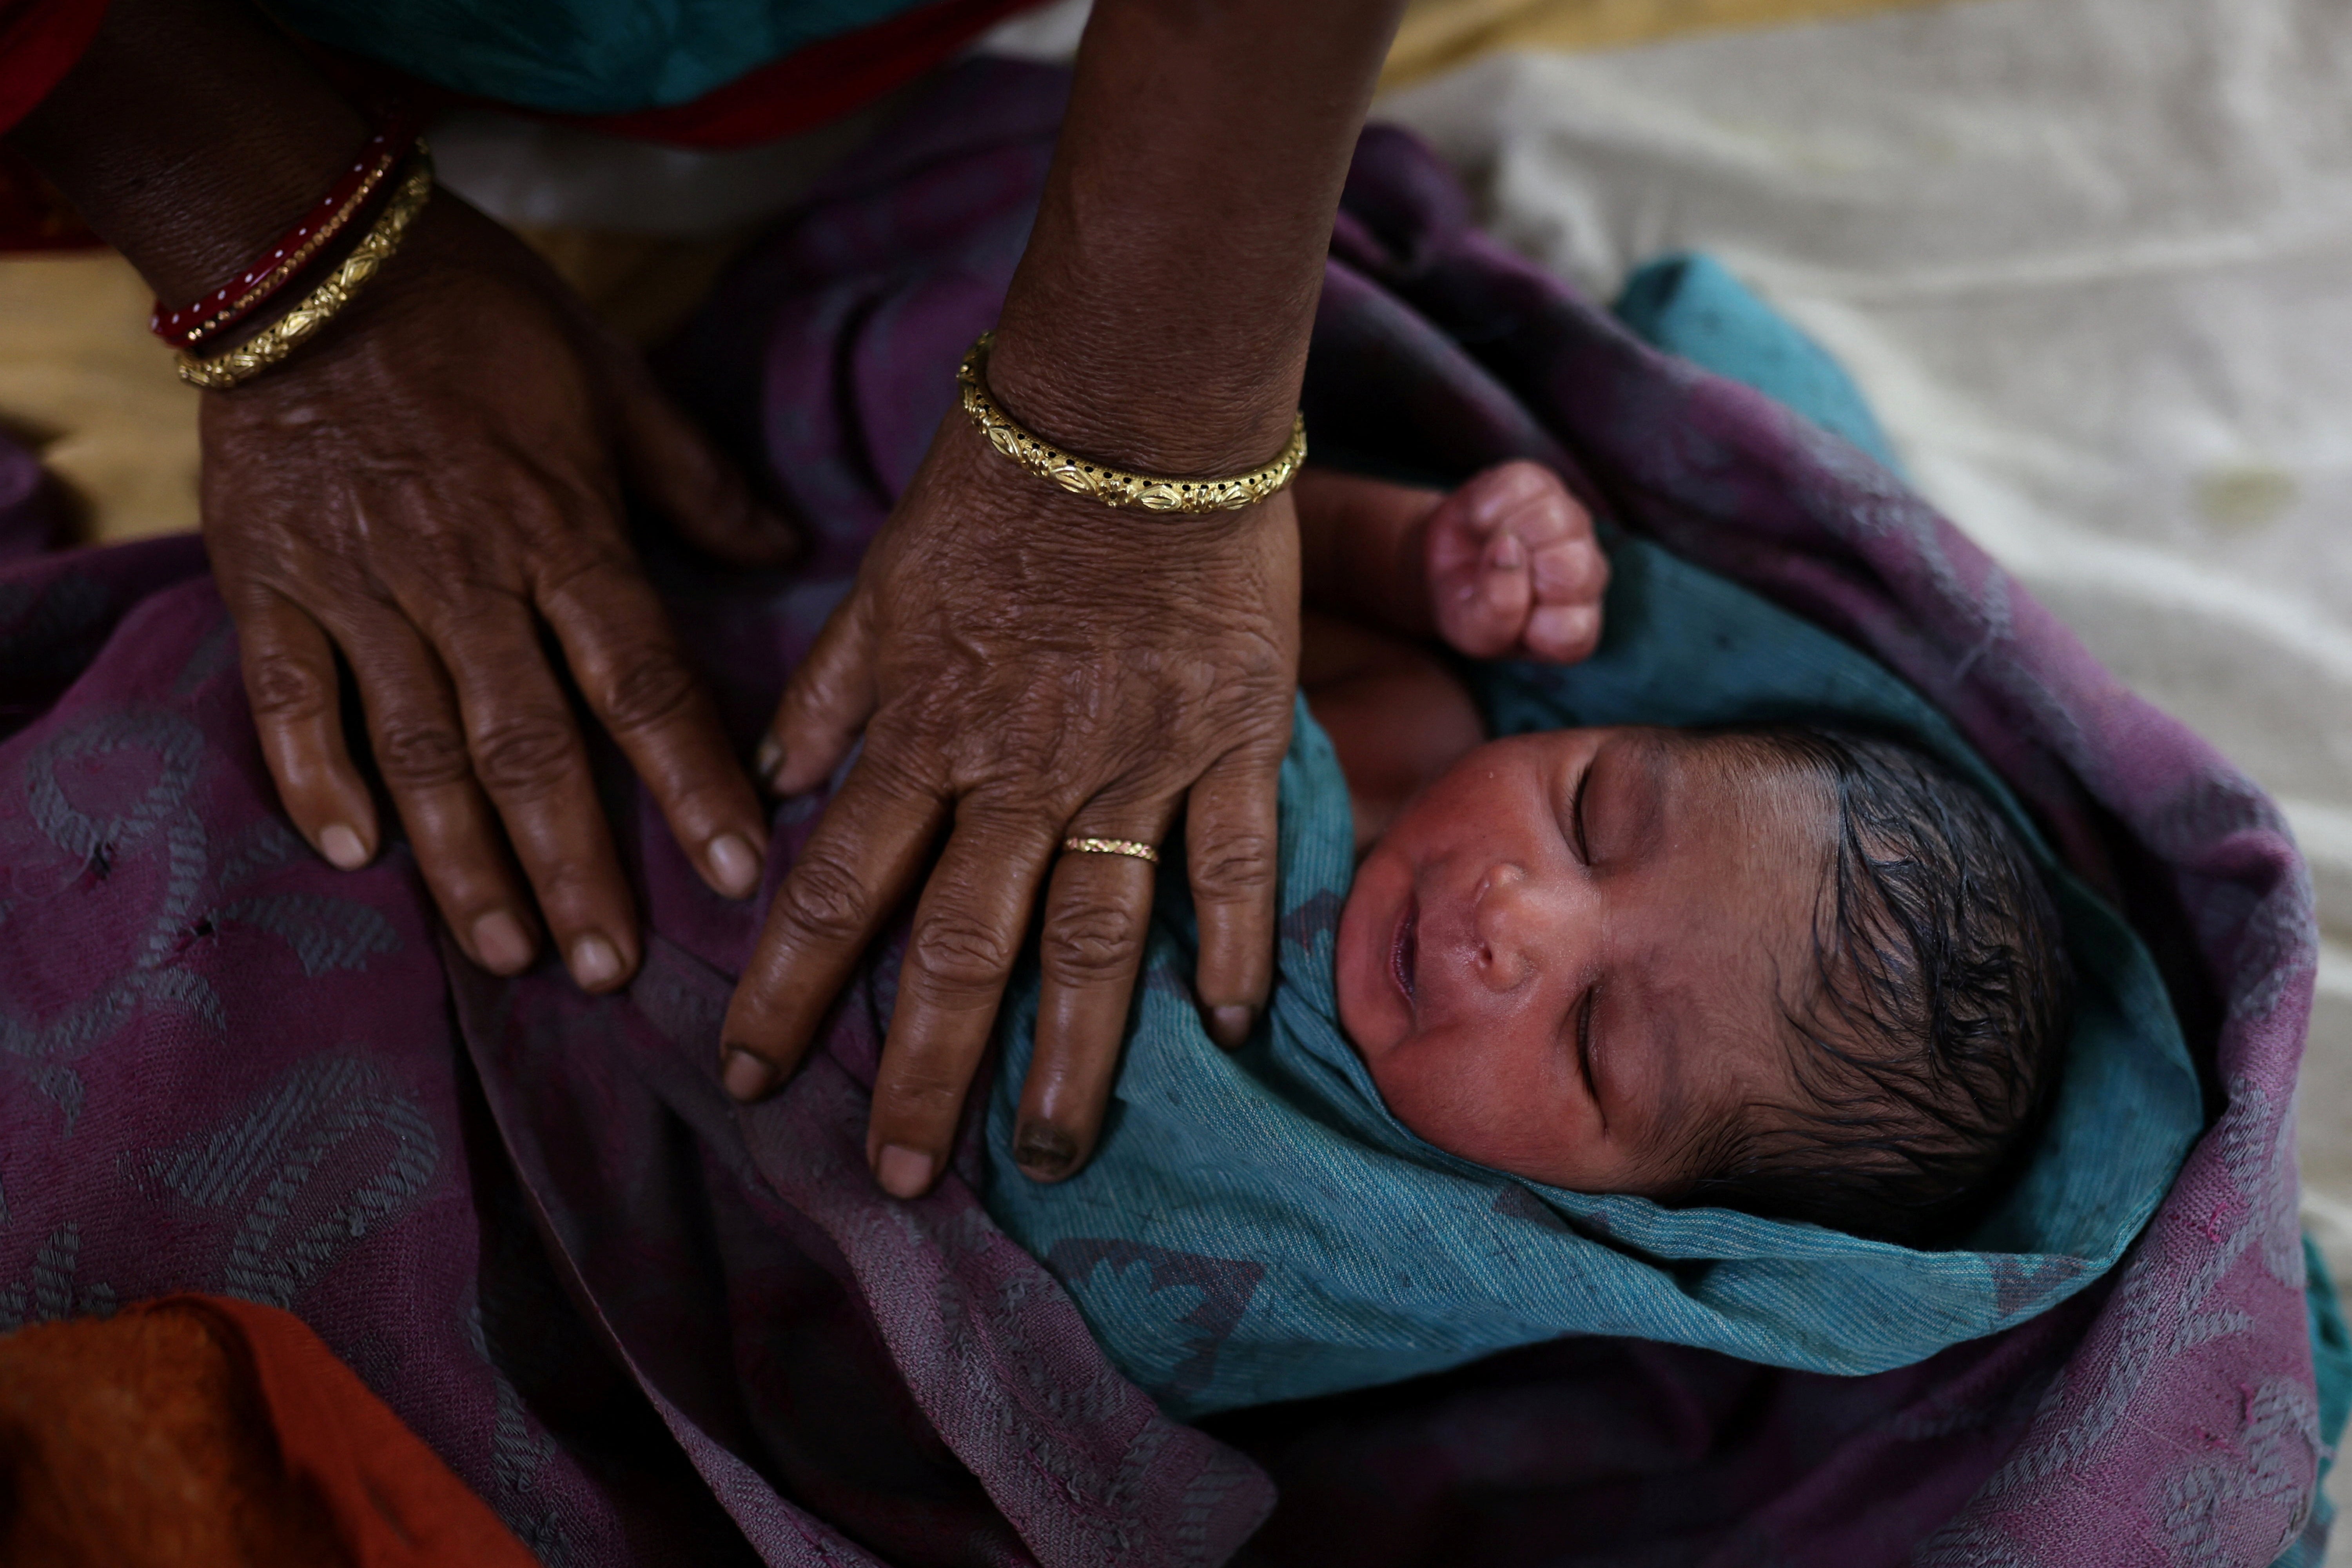 A nurse takes care of a newborn baby at a hospital in Kishanganj district